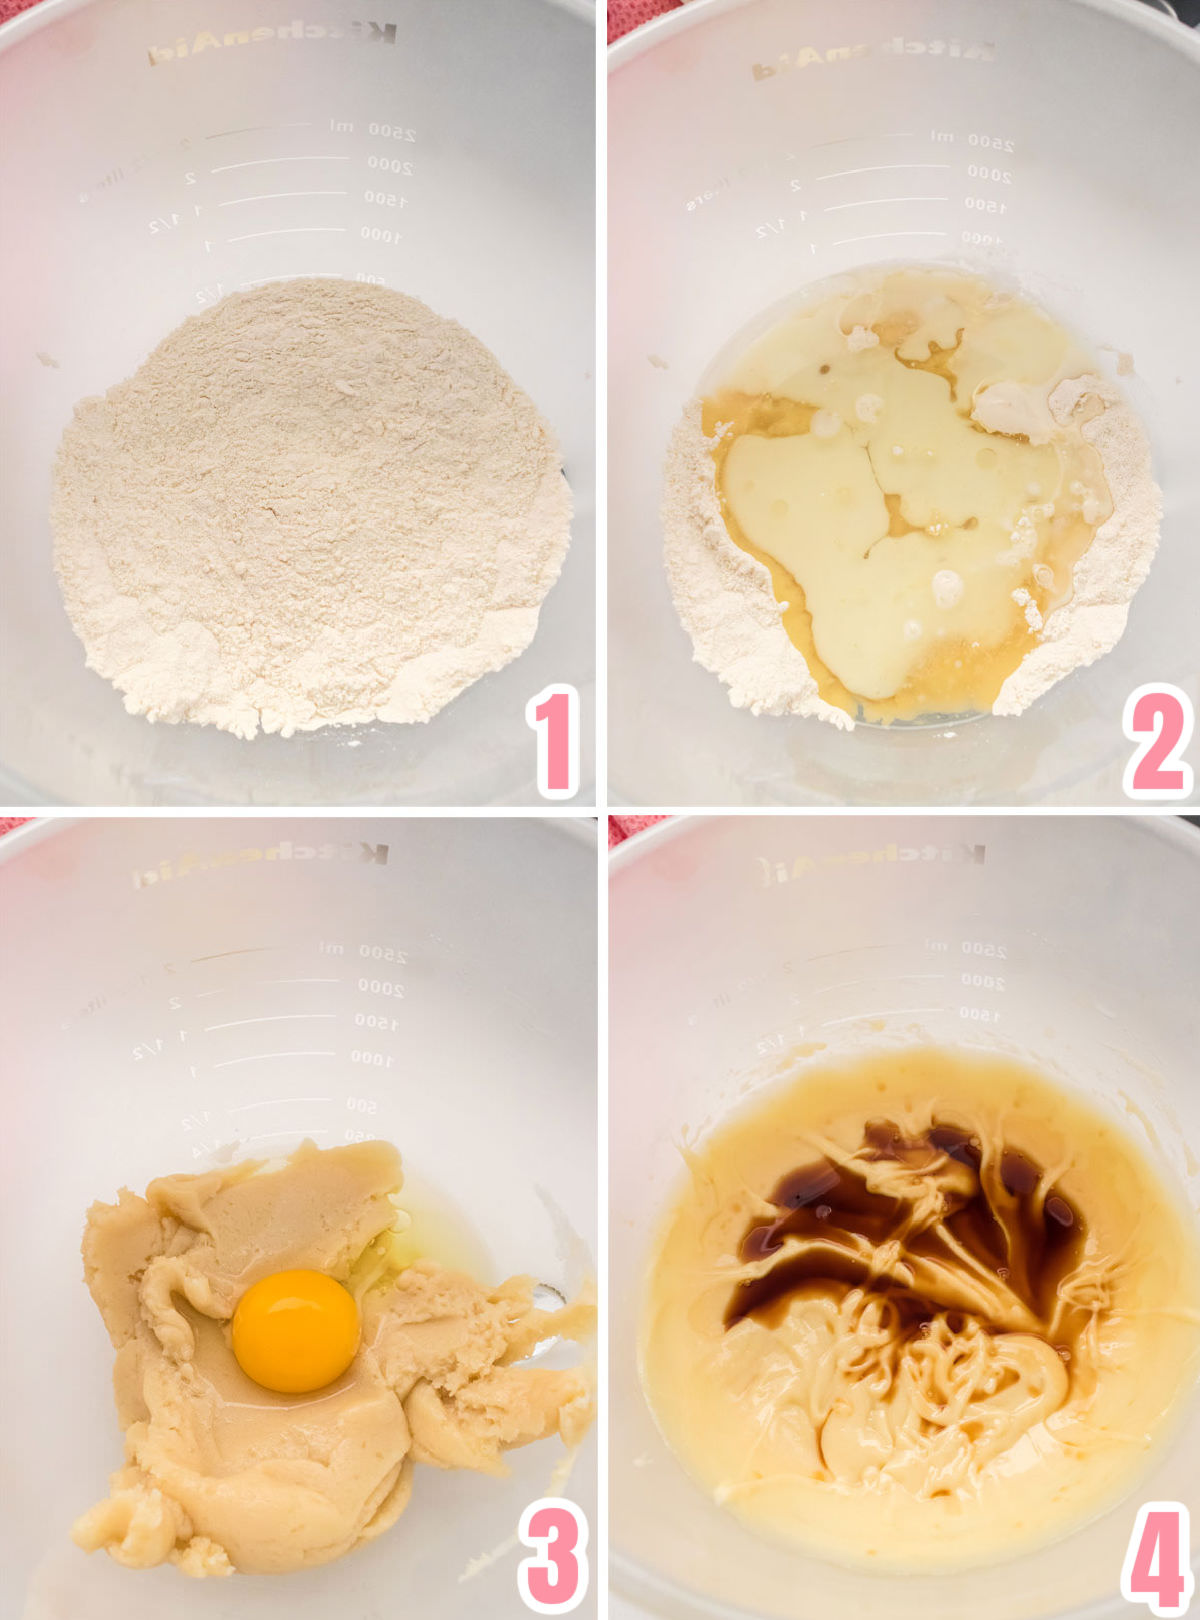 Collage image showing how to make the Homemade Vanilla Cupcake batter.